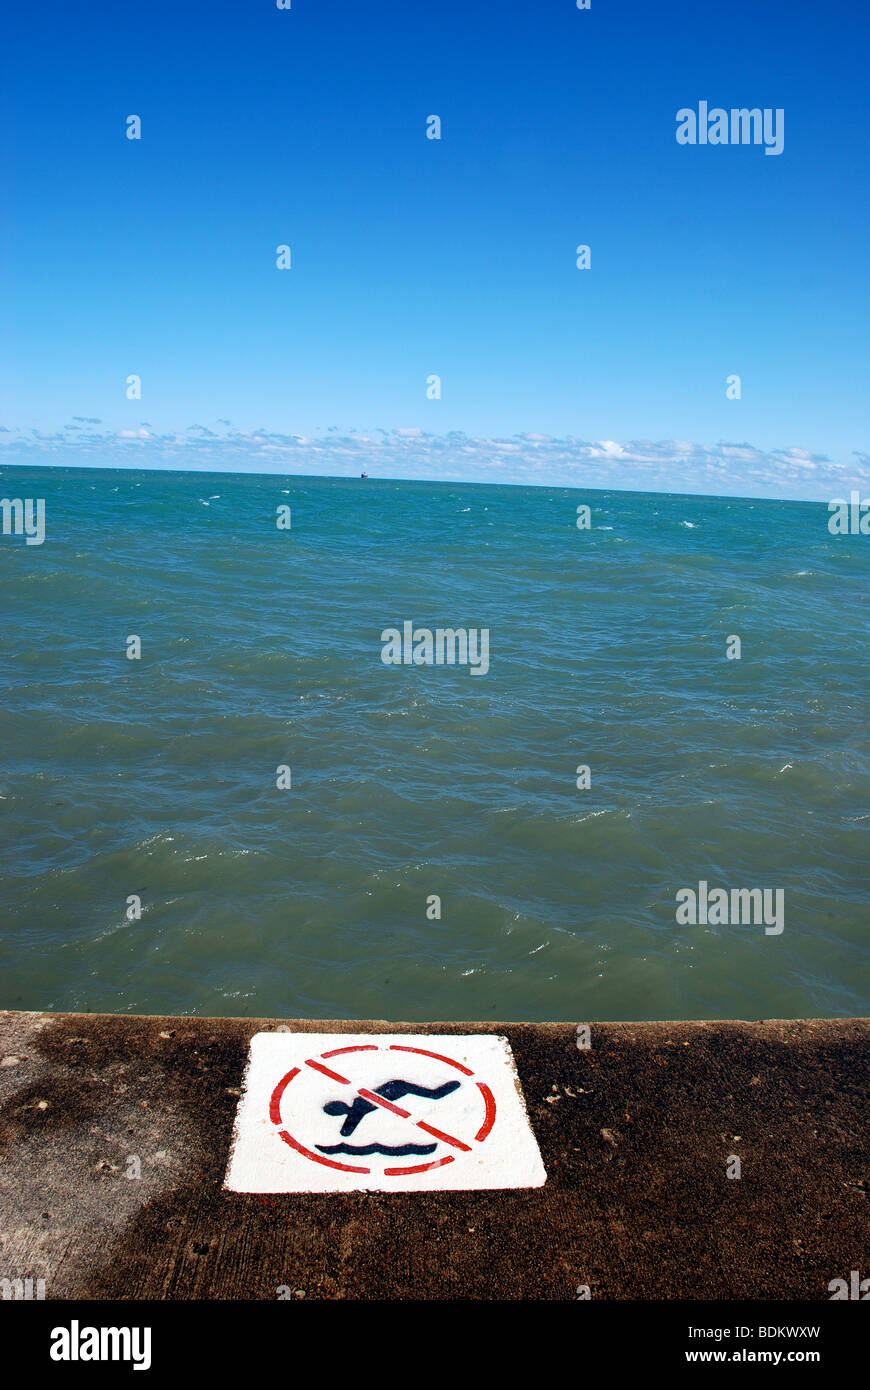 No divin sign on the shores of Lake Michigan in Chicago Stock Photo